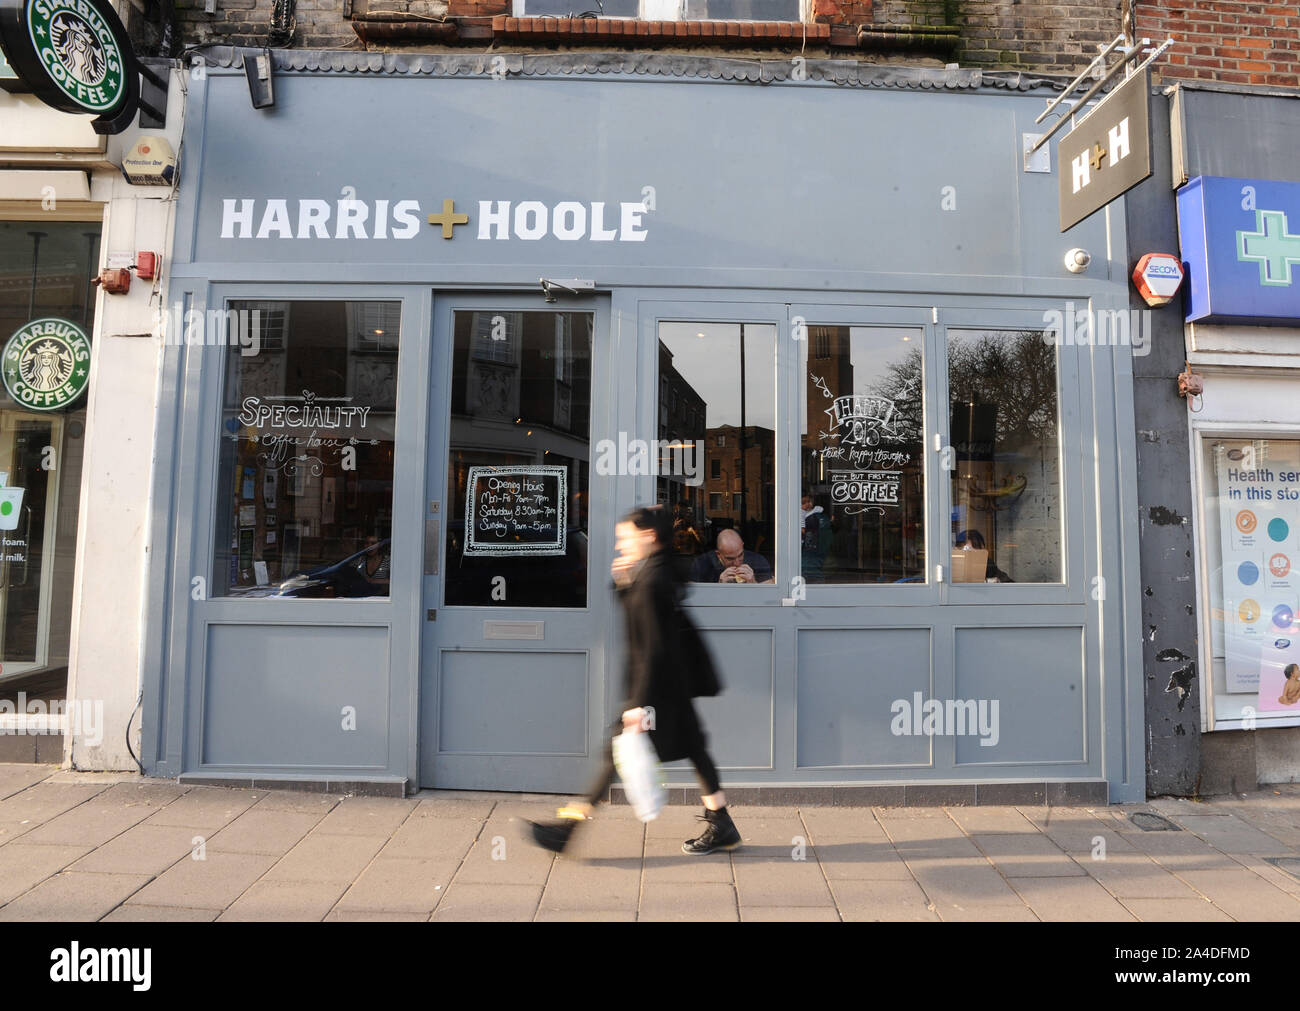 Photo Must Be Credited ©Kate Green/Alpha Press 076006 08/01/13 Harris + Hoole Coffee Shop in Crouch End High Street, North London. Harris + Hoole is the brainchild of three siblings - Nick, Andrew and Laura Tolley. Their vision is to bring great tasting speciality coffee to the high street. Not an easy mission for three individuals, but having already set up eight Taylor St. Baristas shops across London and Brighton since 2006, they know how to brew a great tasting cup of coffee. But to be able to provide the high street with fantastic coffee takes investment and backing, and few people know t Stock Photo